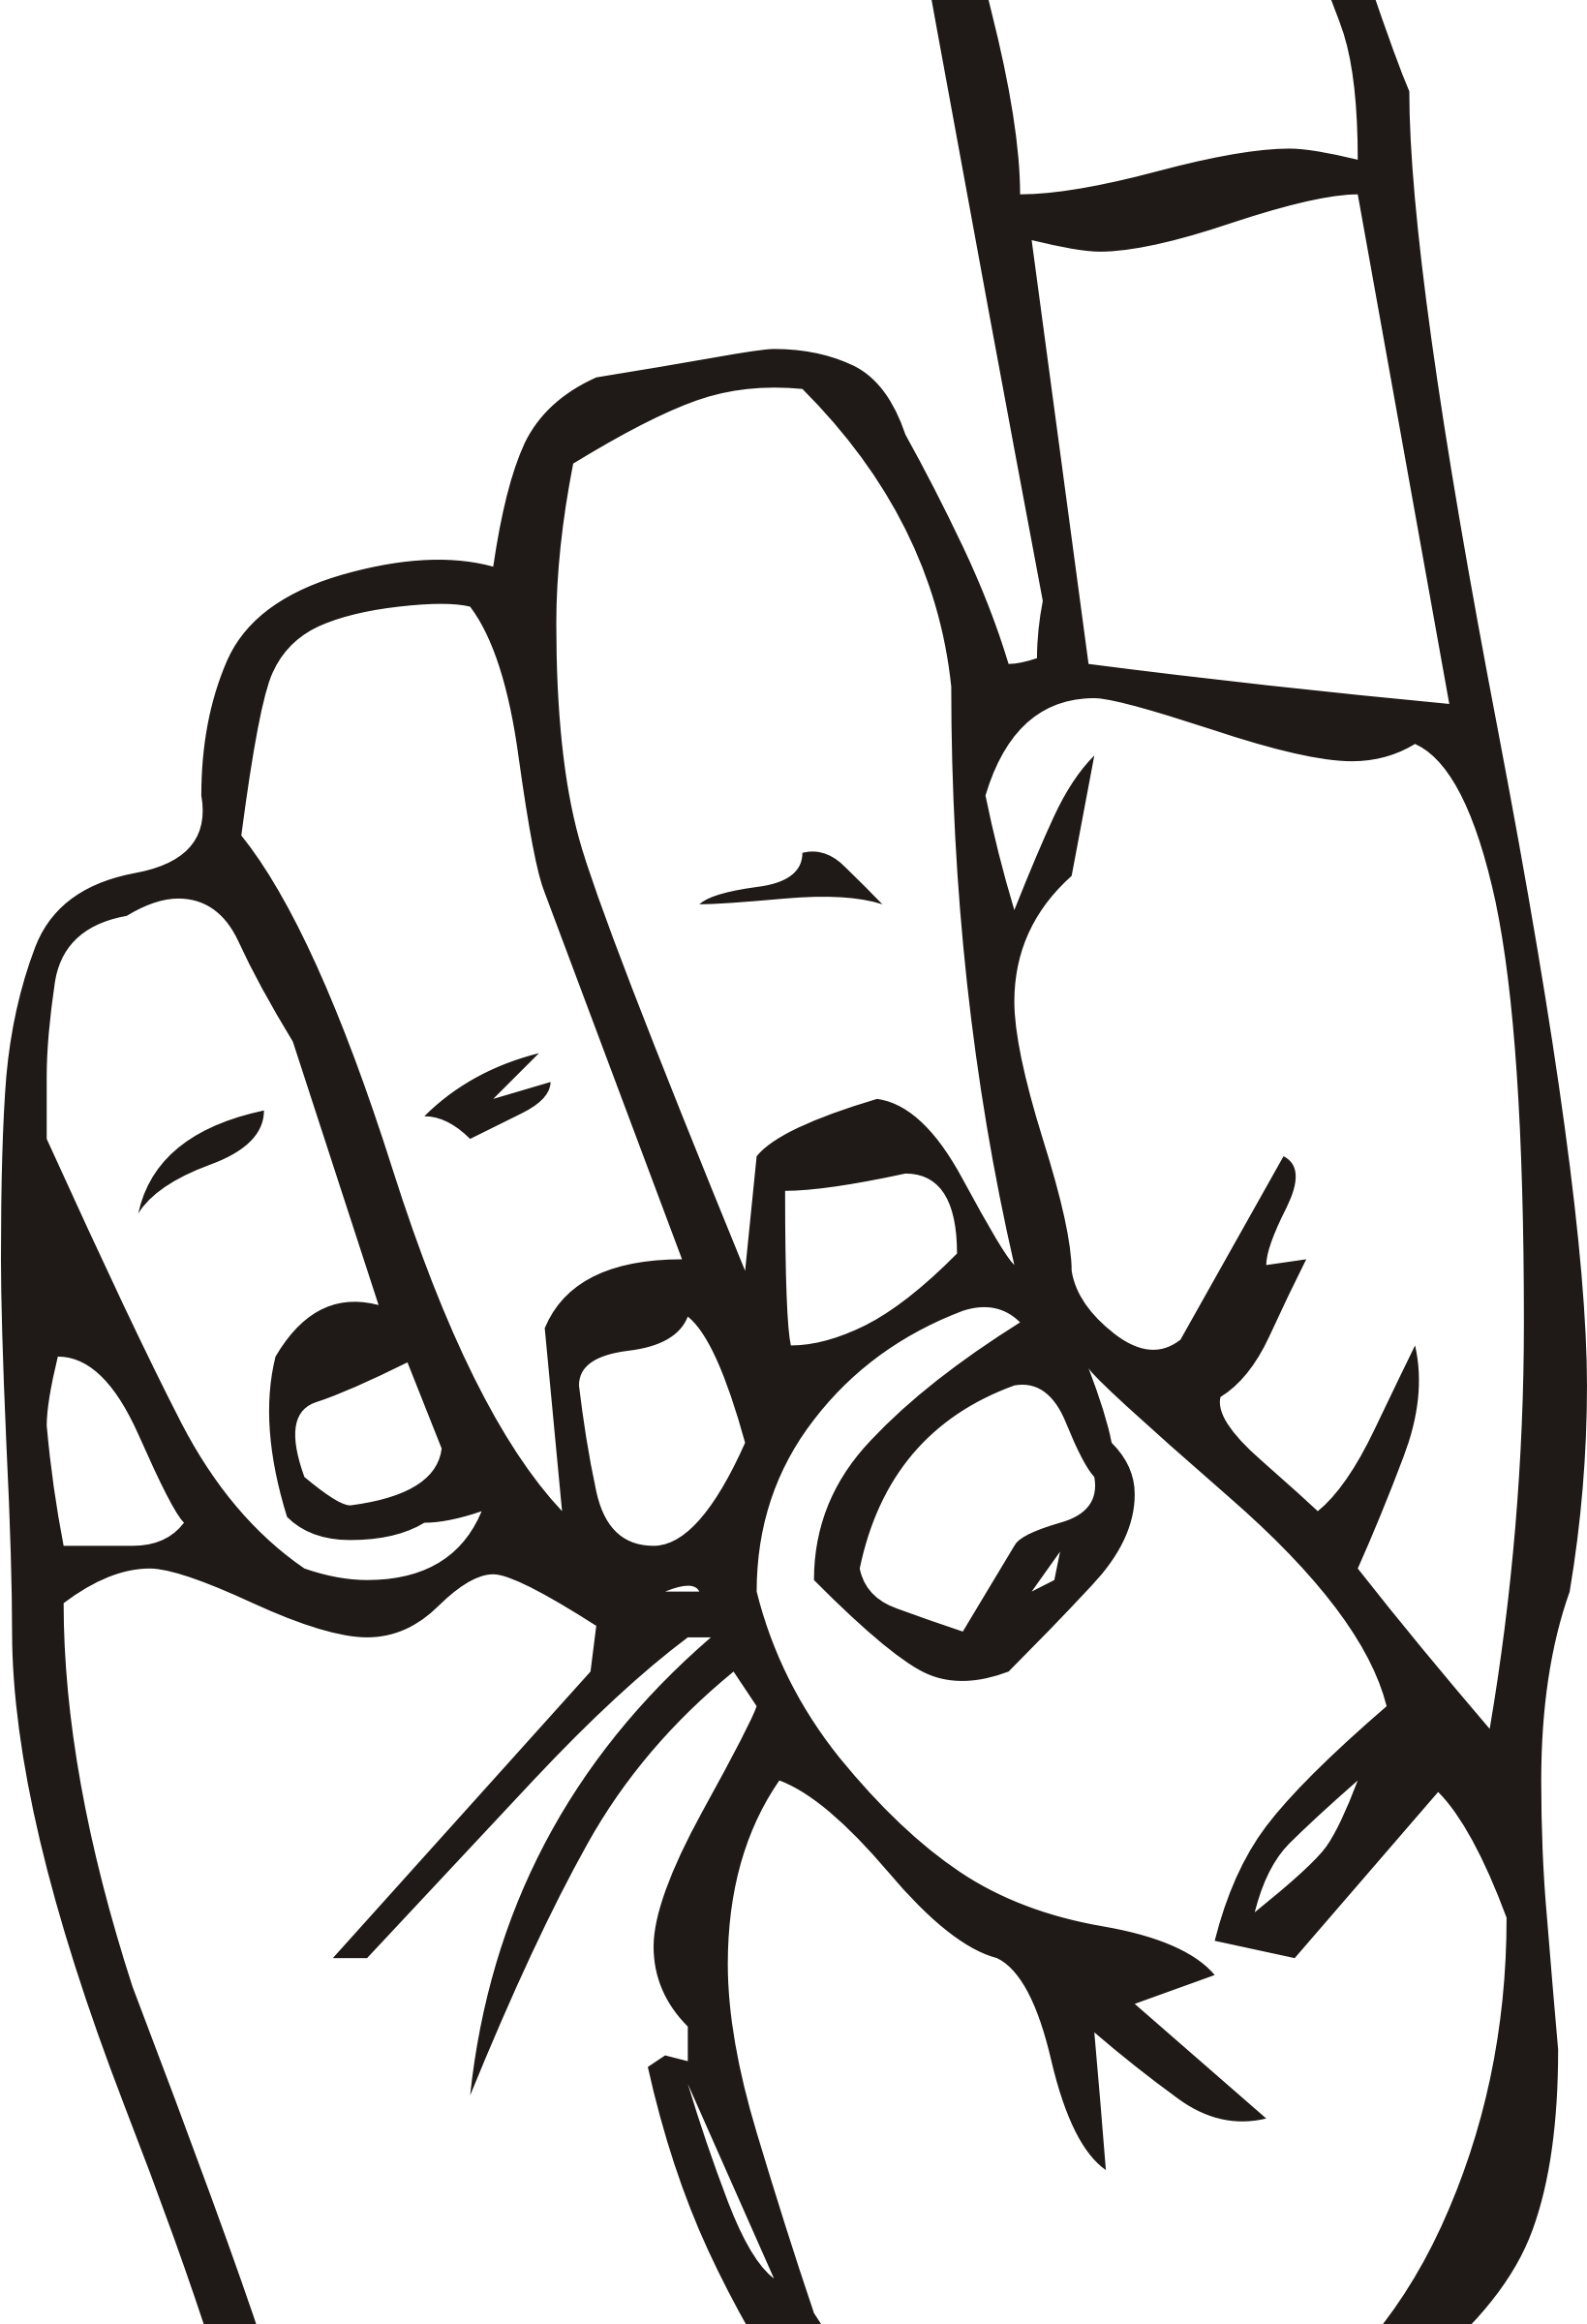 Sign language d pointing. Finger clipart point